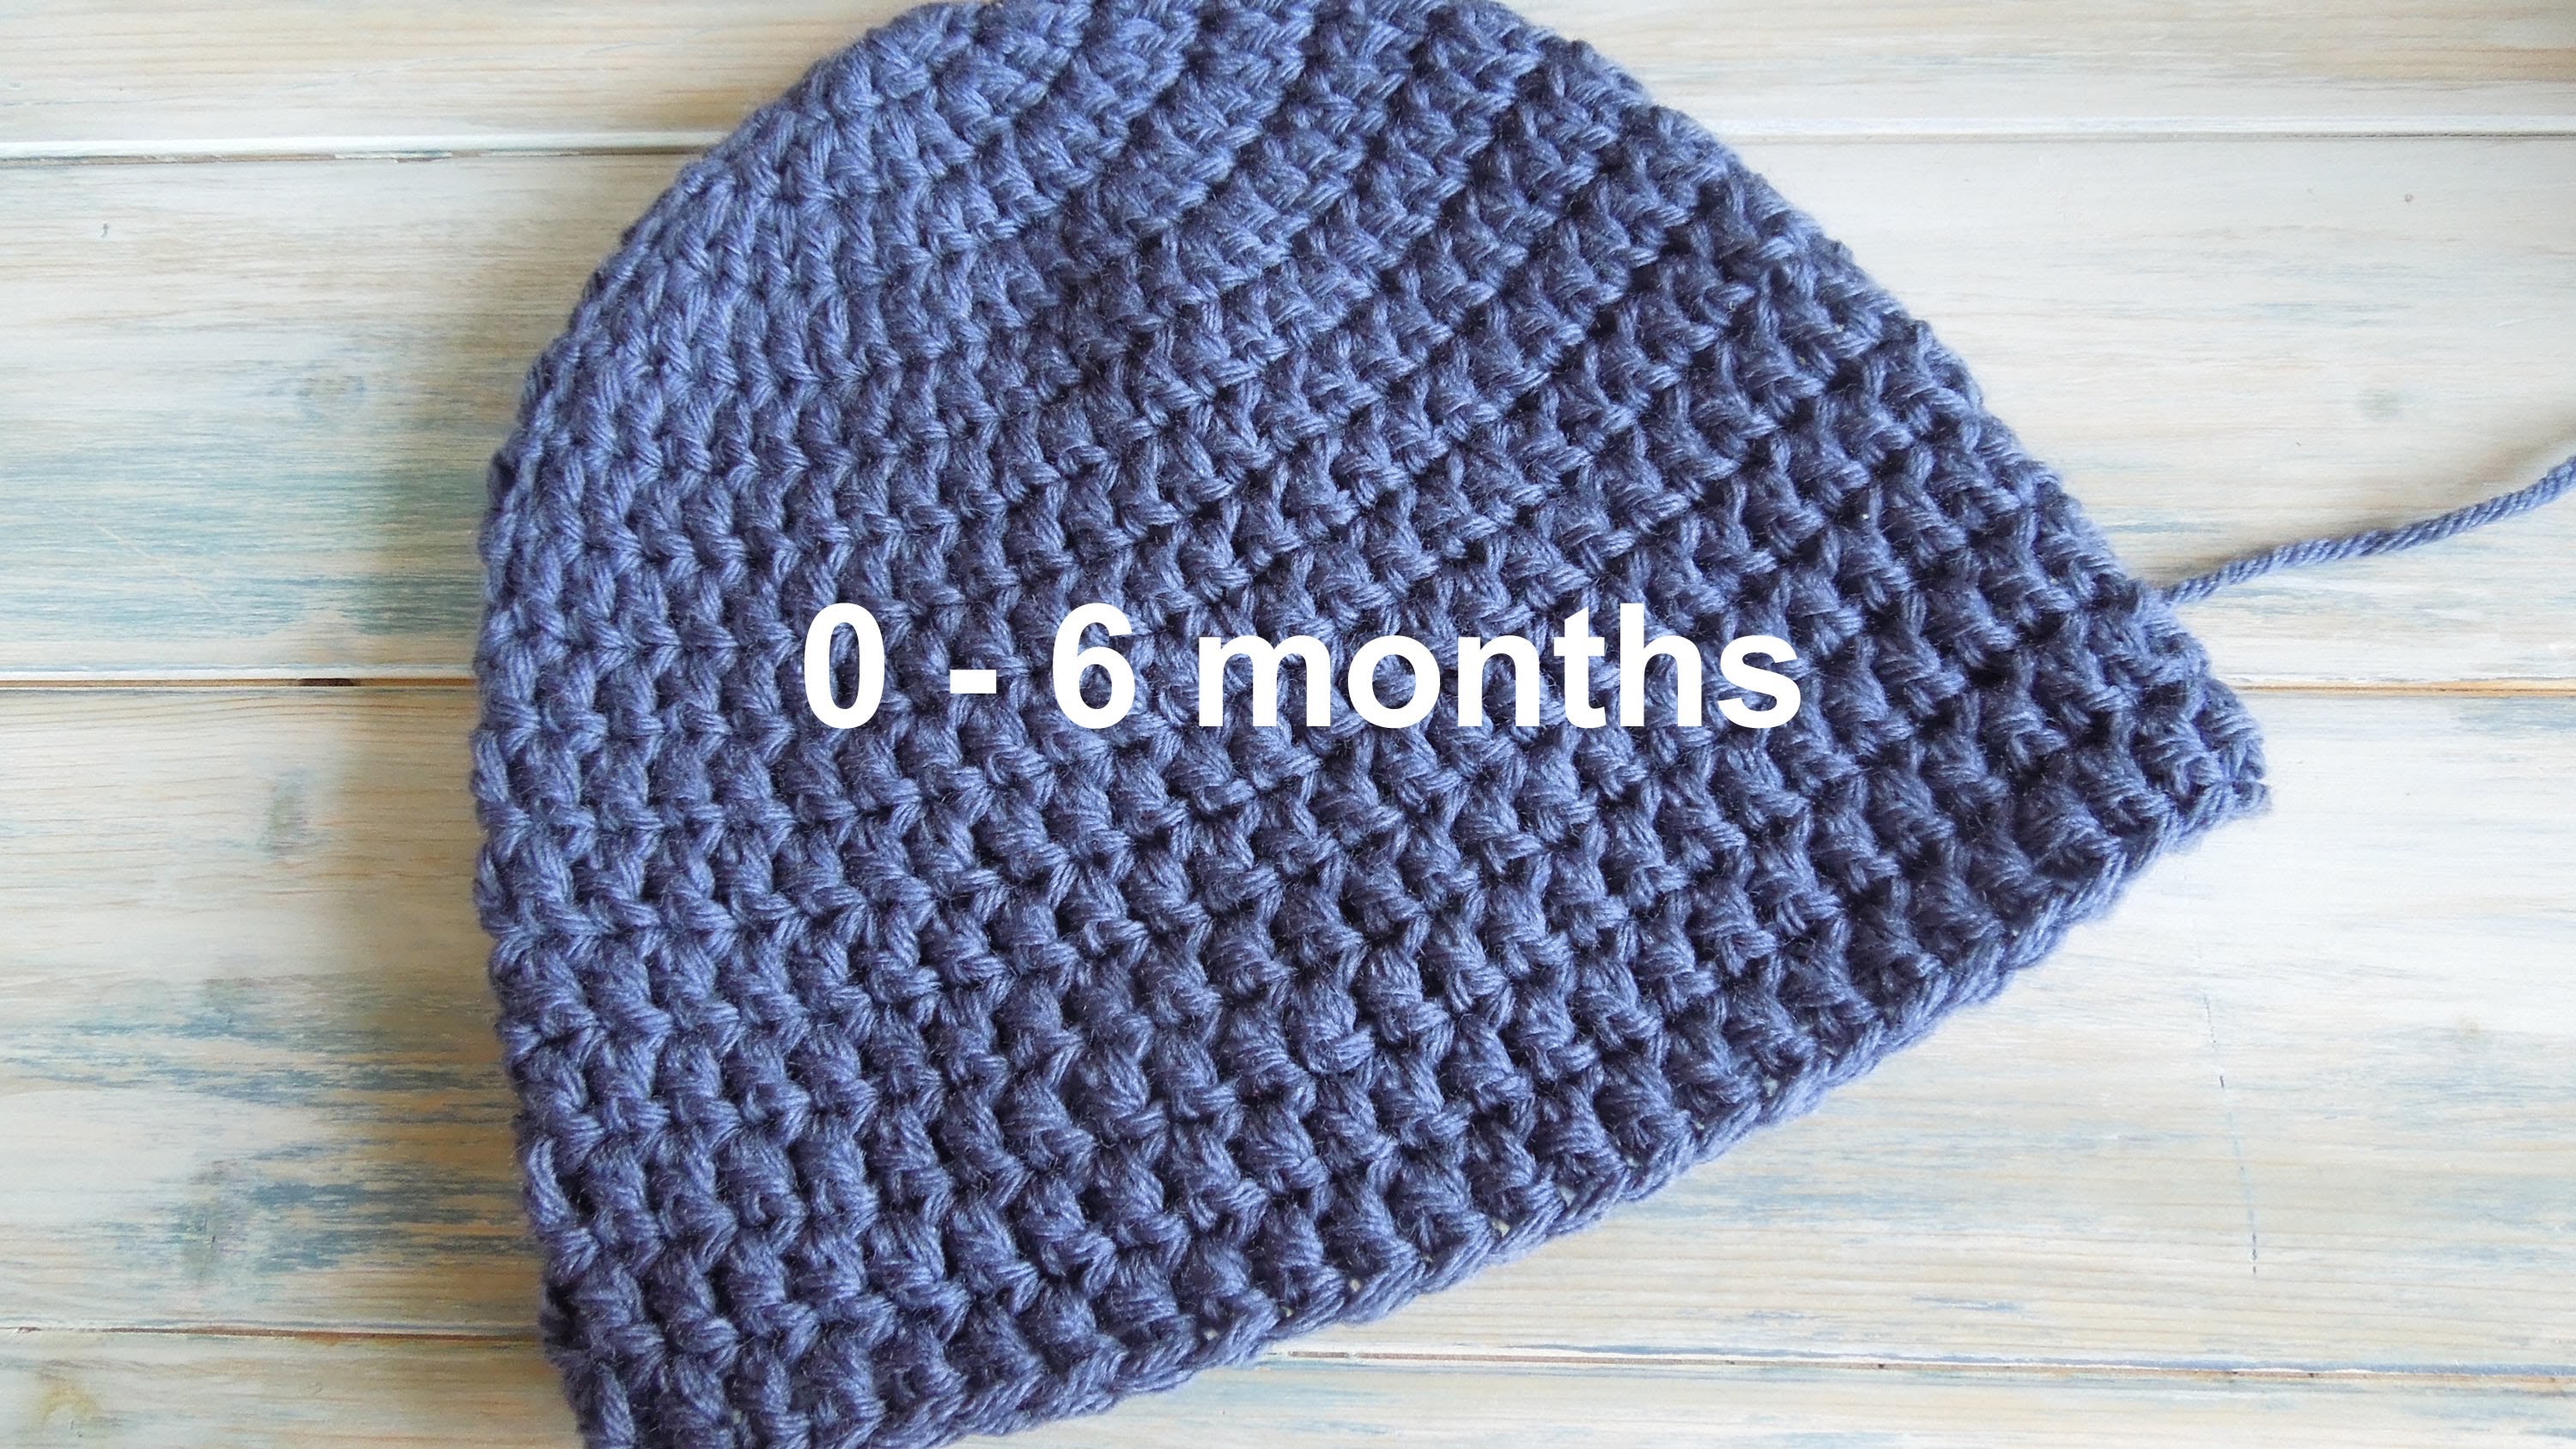 Crochet cap for babies (crochet) how to - crochet a simple baby beanie for 0-6 months - youtube DKRYPOO